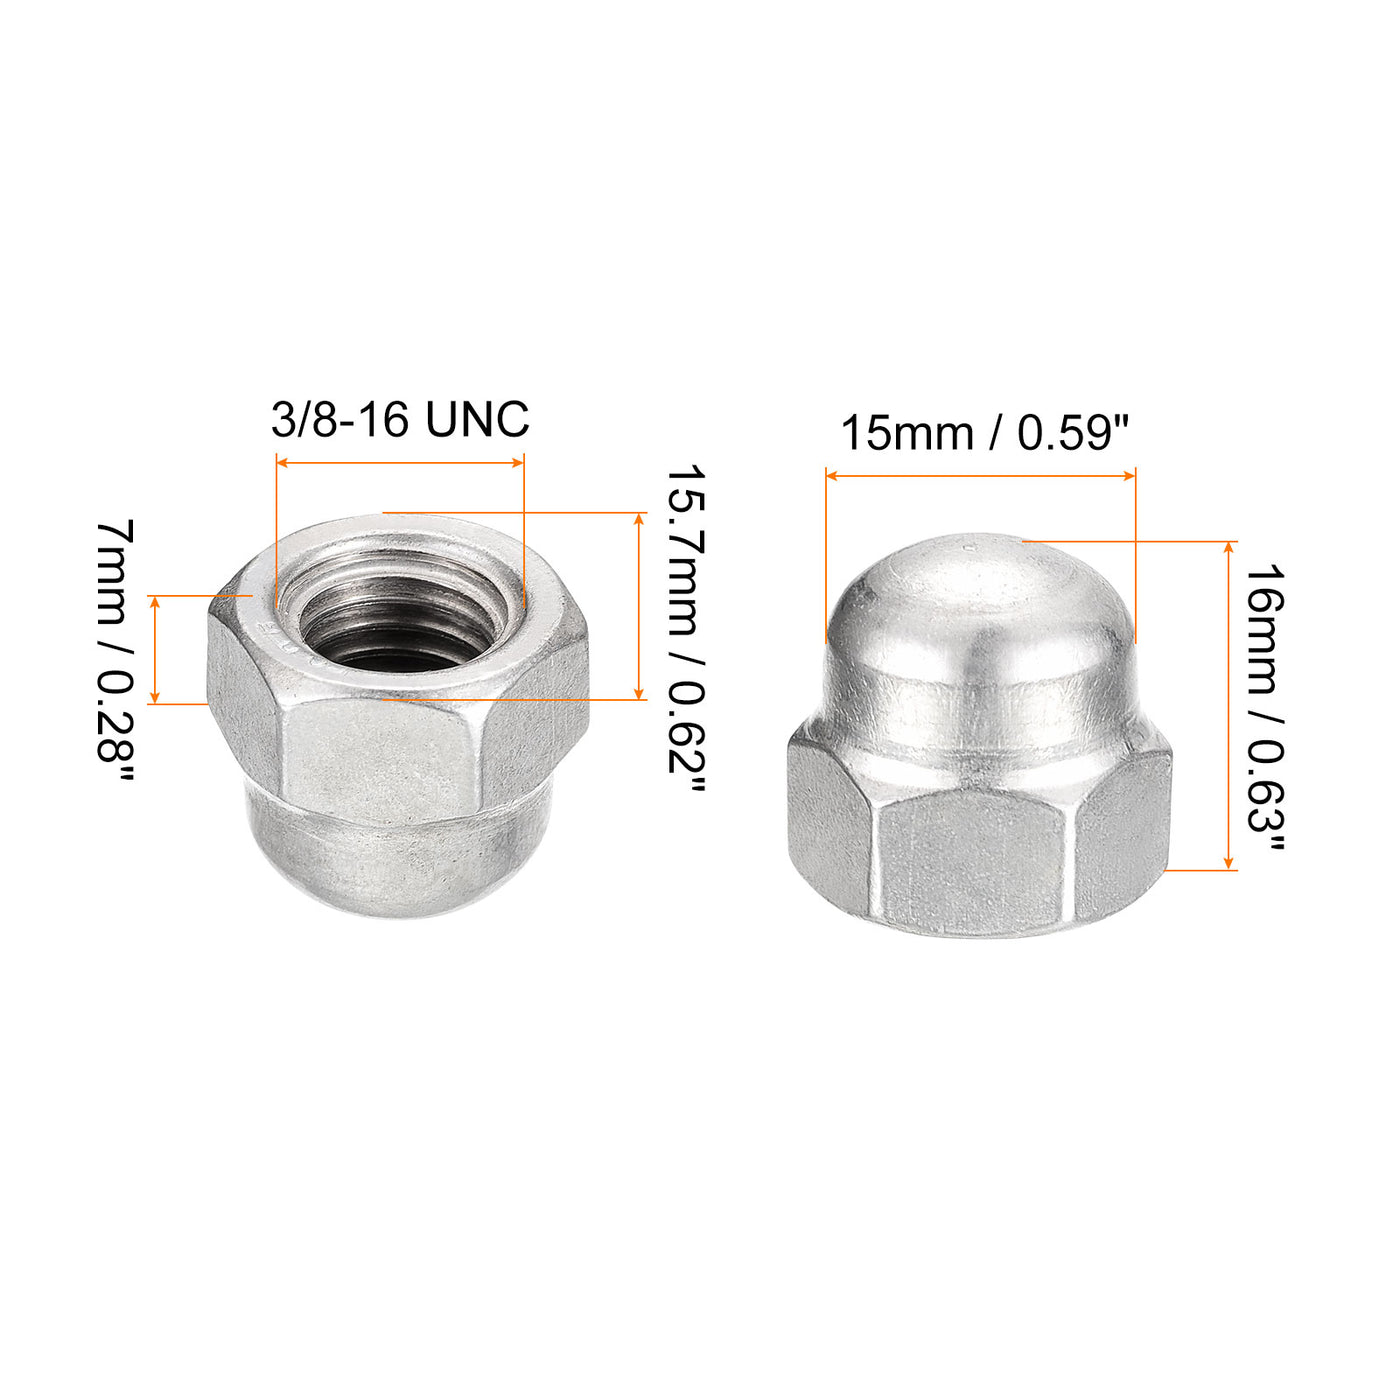 uxcell Uxcell 3/8-16 Acorn Cap Nuts,25pcs - 304 Stainless Steel Hardware Nuts, Acorn Hex Cap Dome Head Nuts for Fasteners (Silver)